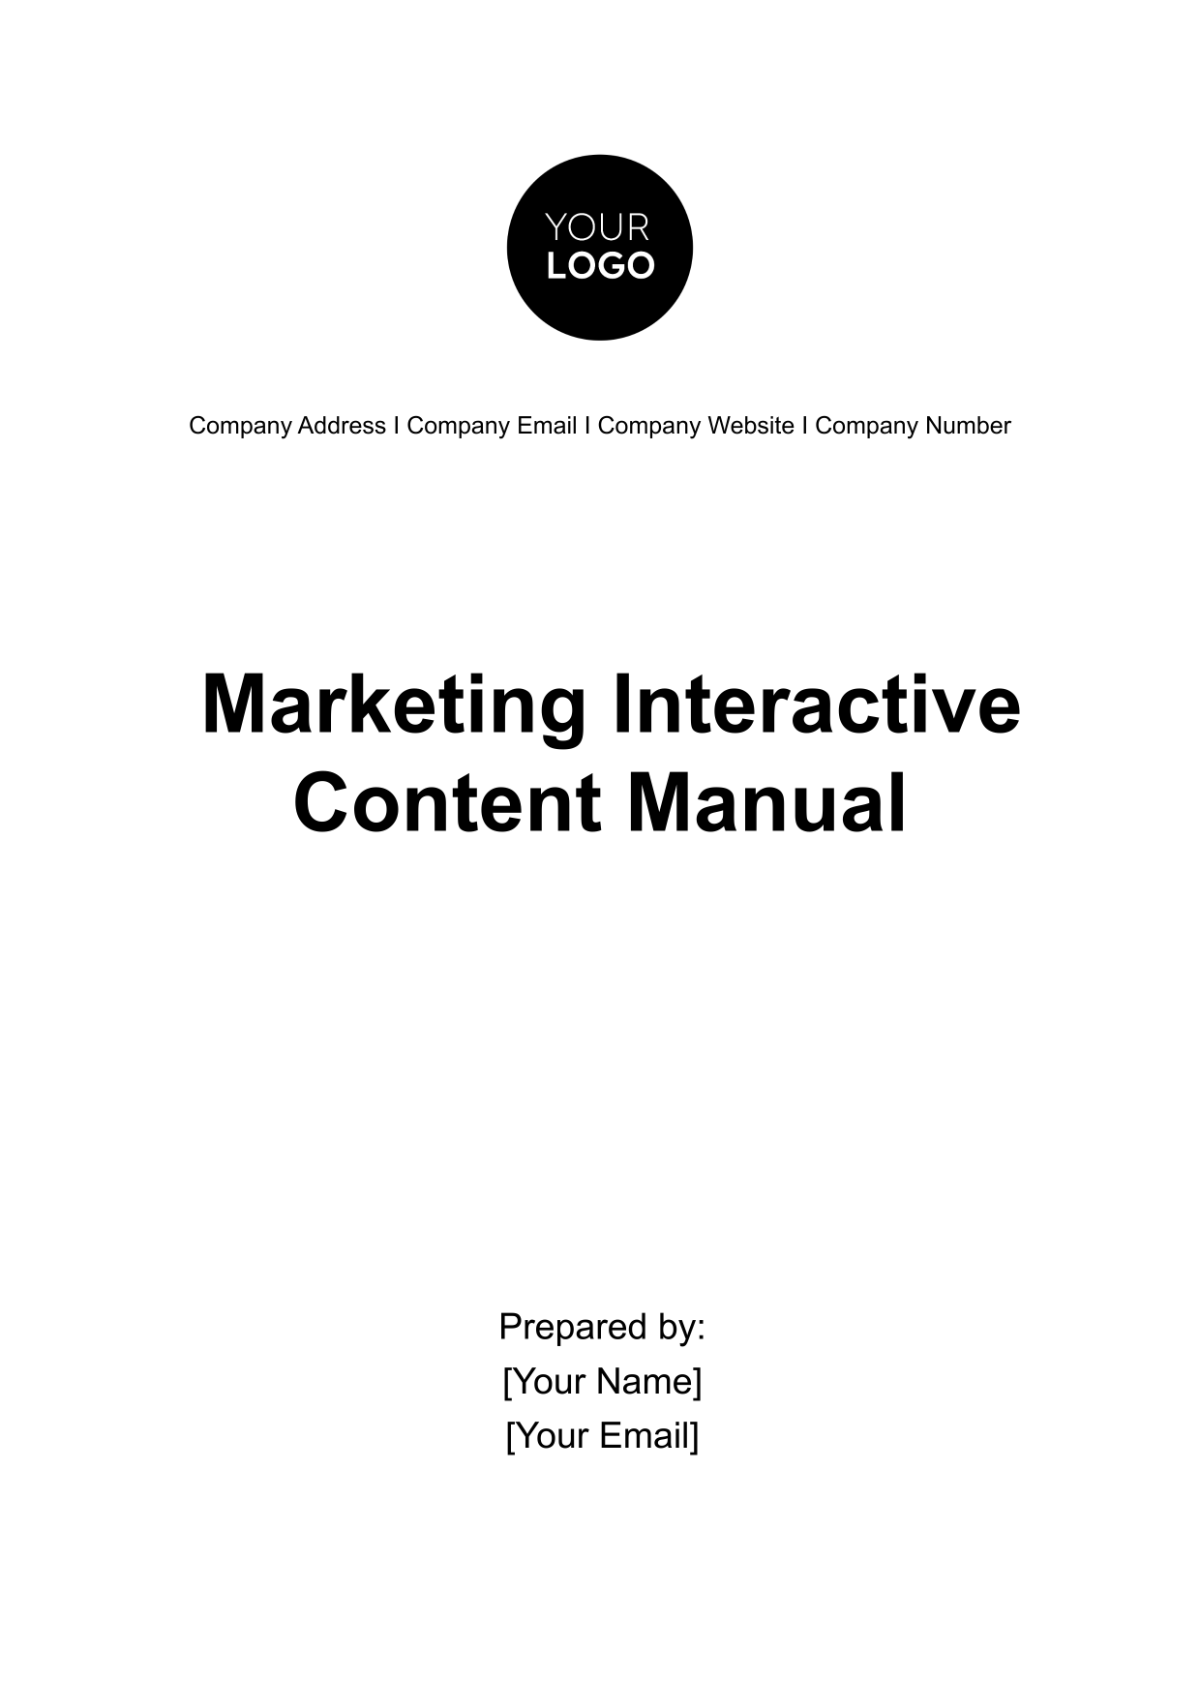 Marketing Interactive Content Manual Template